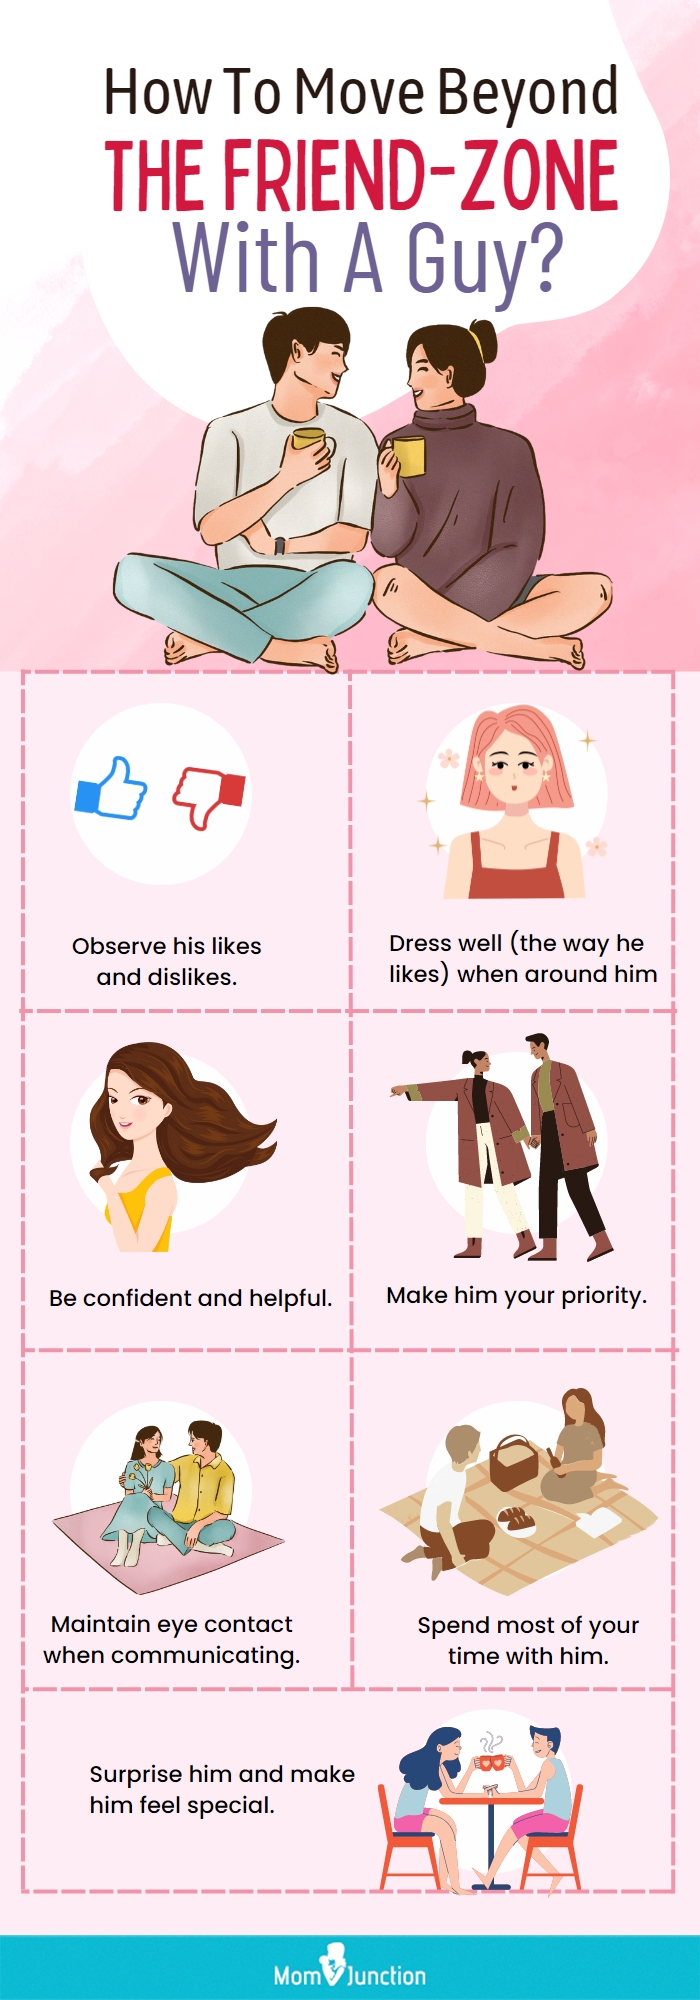 how to move beyond the friend zone with a guy [infographic]